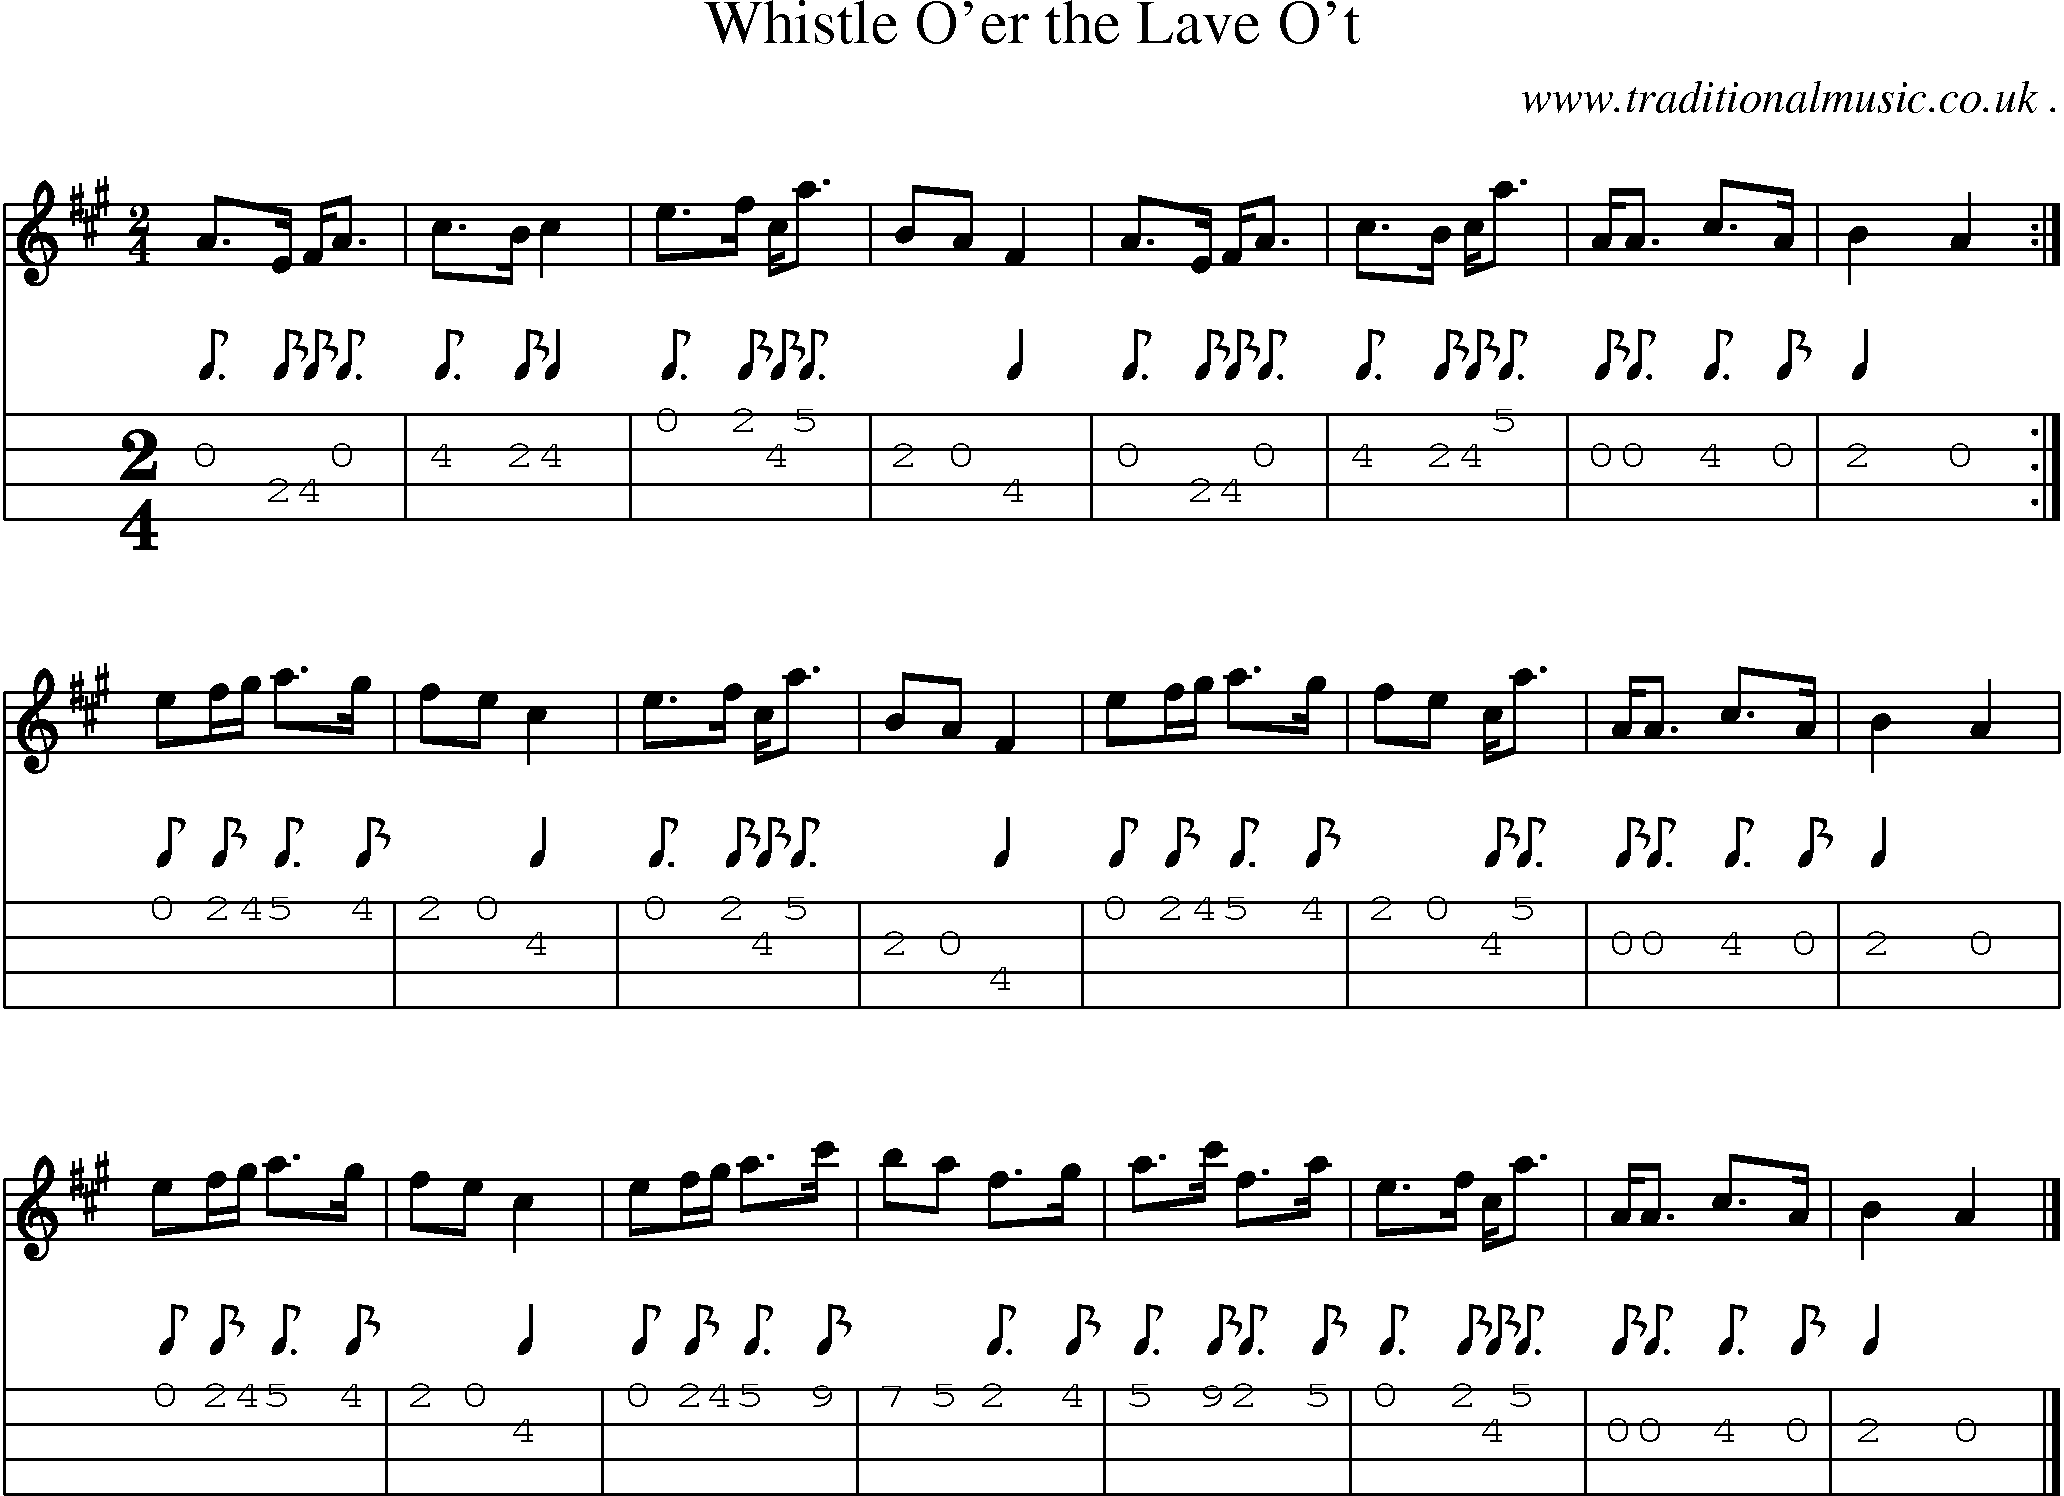 Sheet-music  score, Chords and Mandolin Tabs for Whistle Oer The Lave Ot